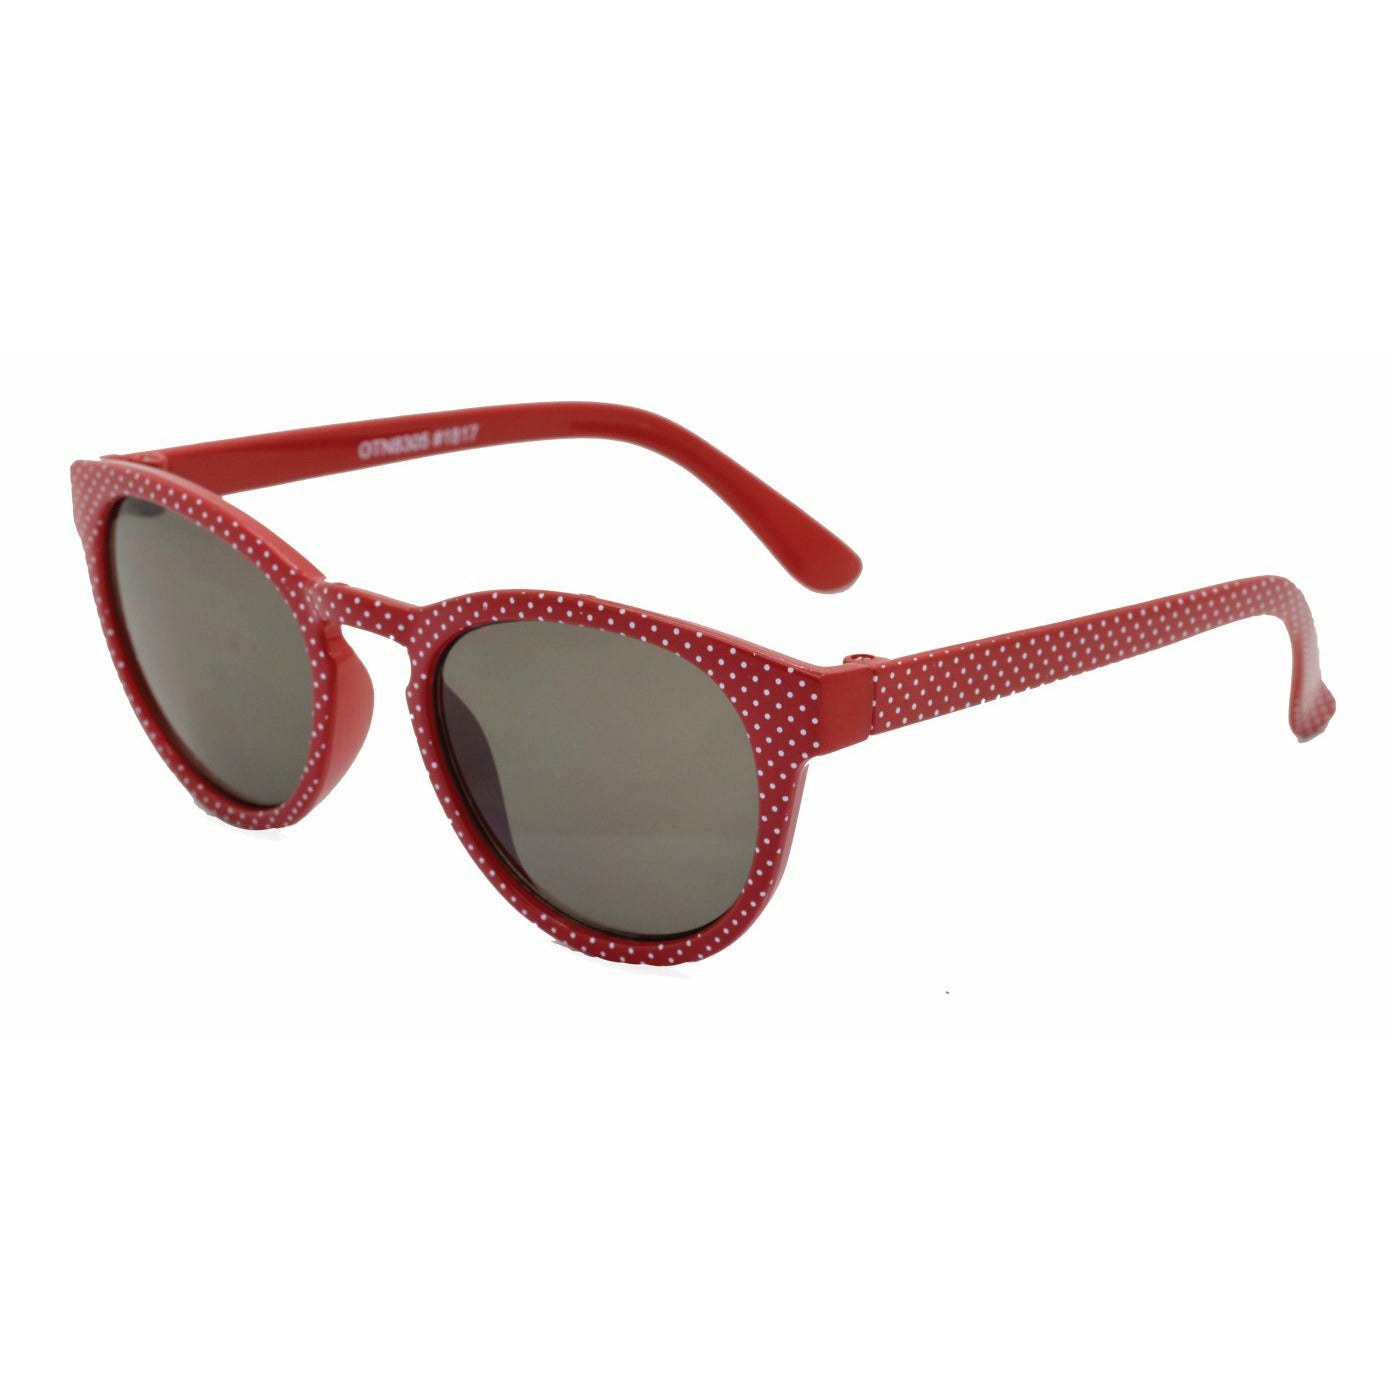 On The Nose Kids Sunglasses - Polly Red